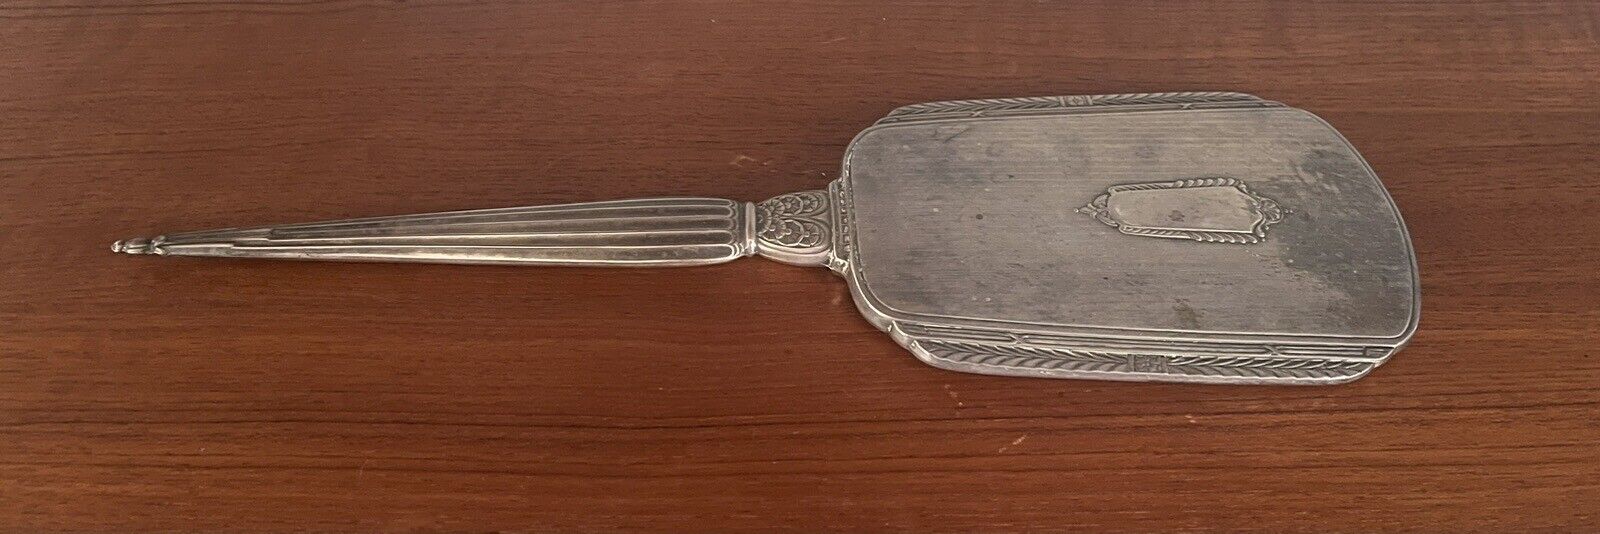 Antique 1920’s Art Deco Sterling Silver Hand Held Mirror